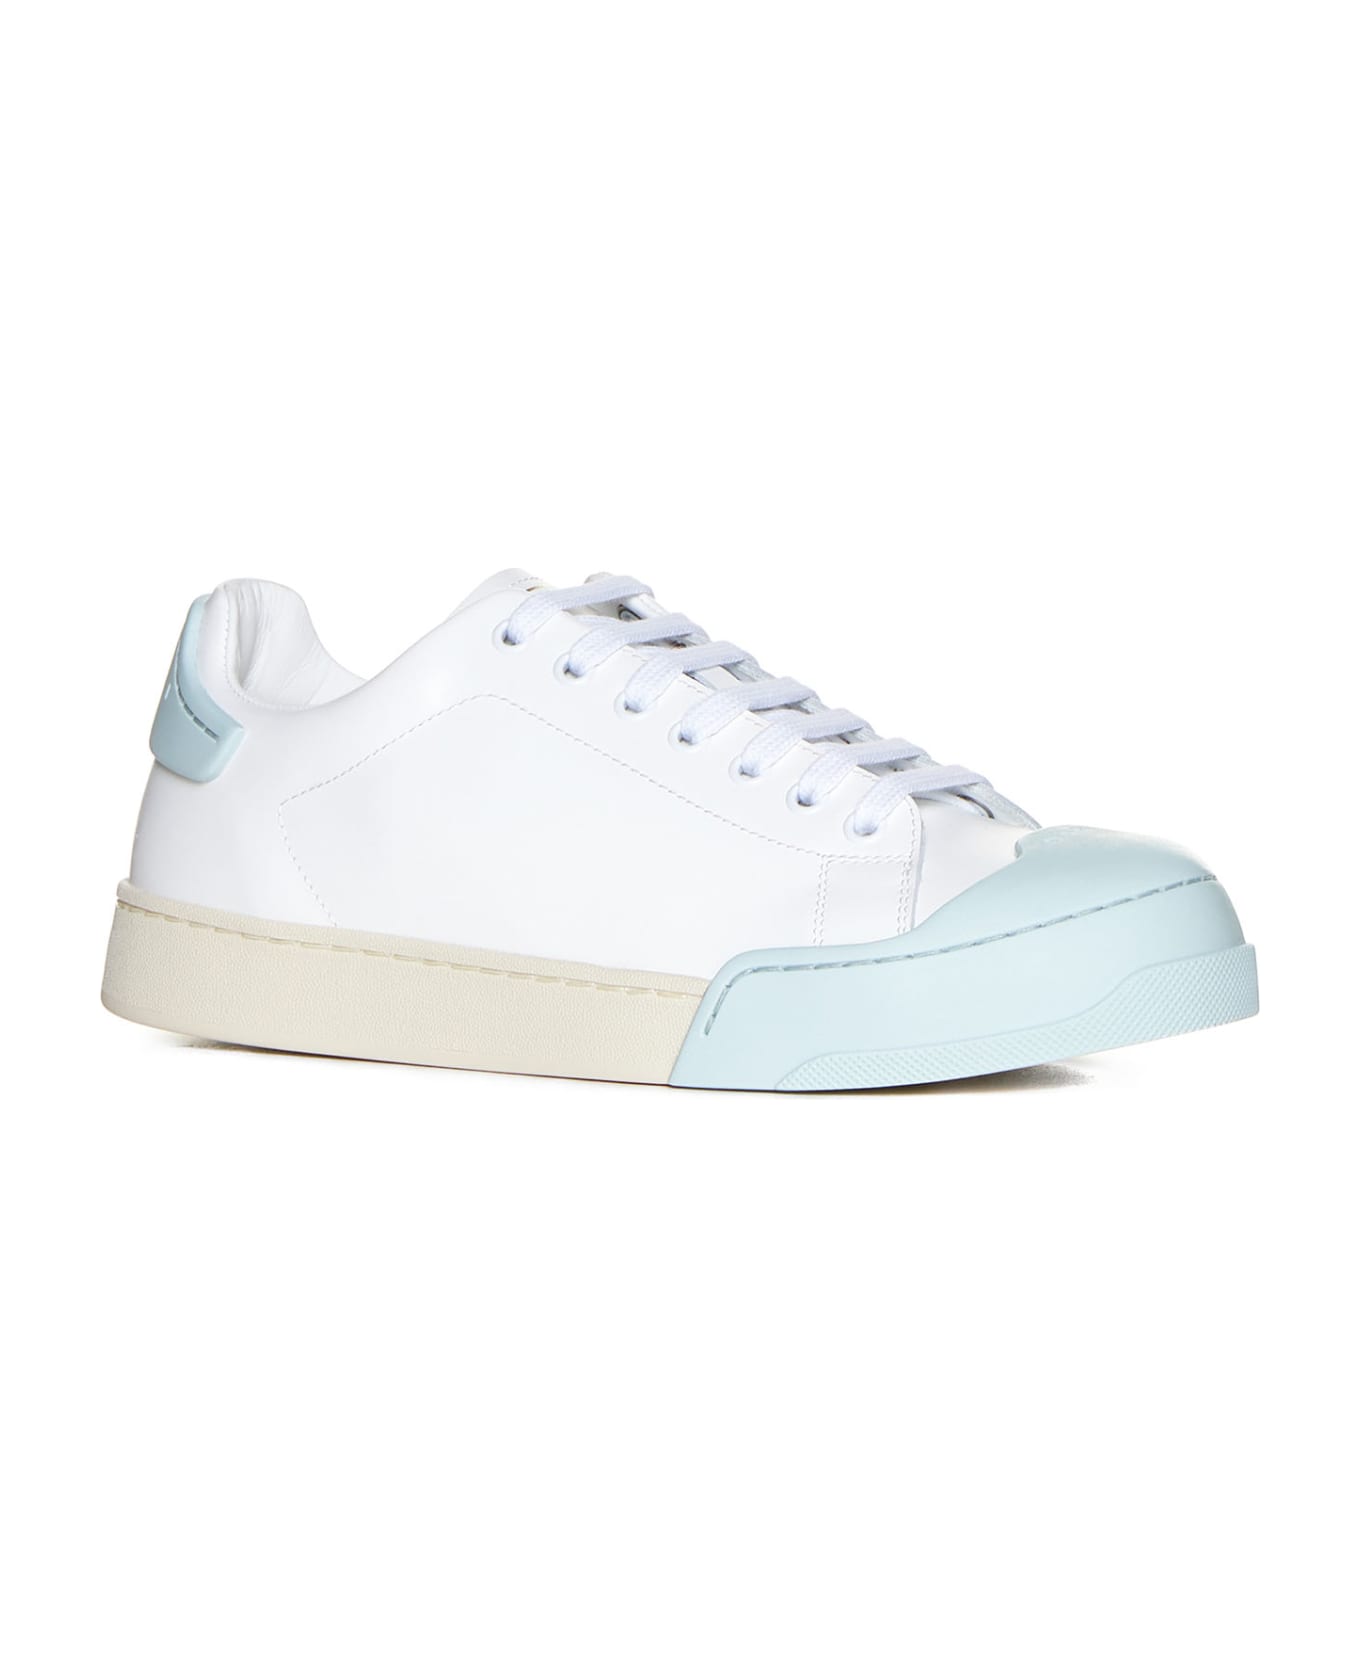 Marni Sneakers - Lily white/mineral ice